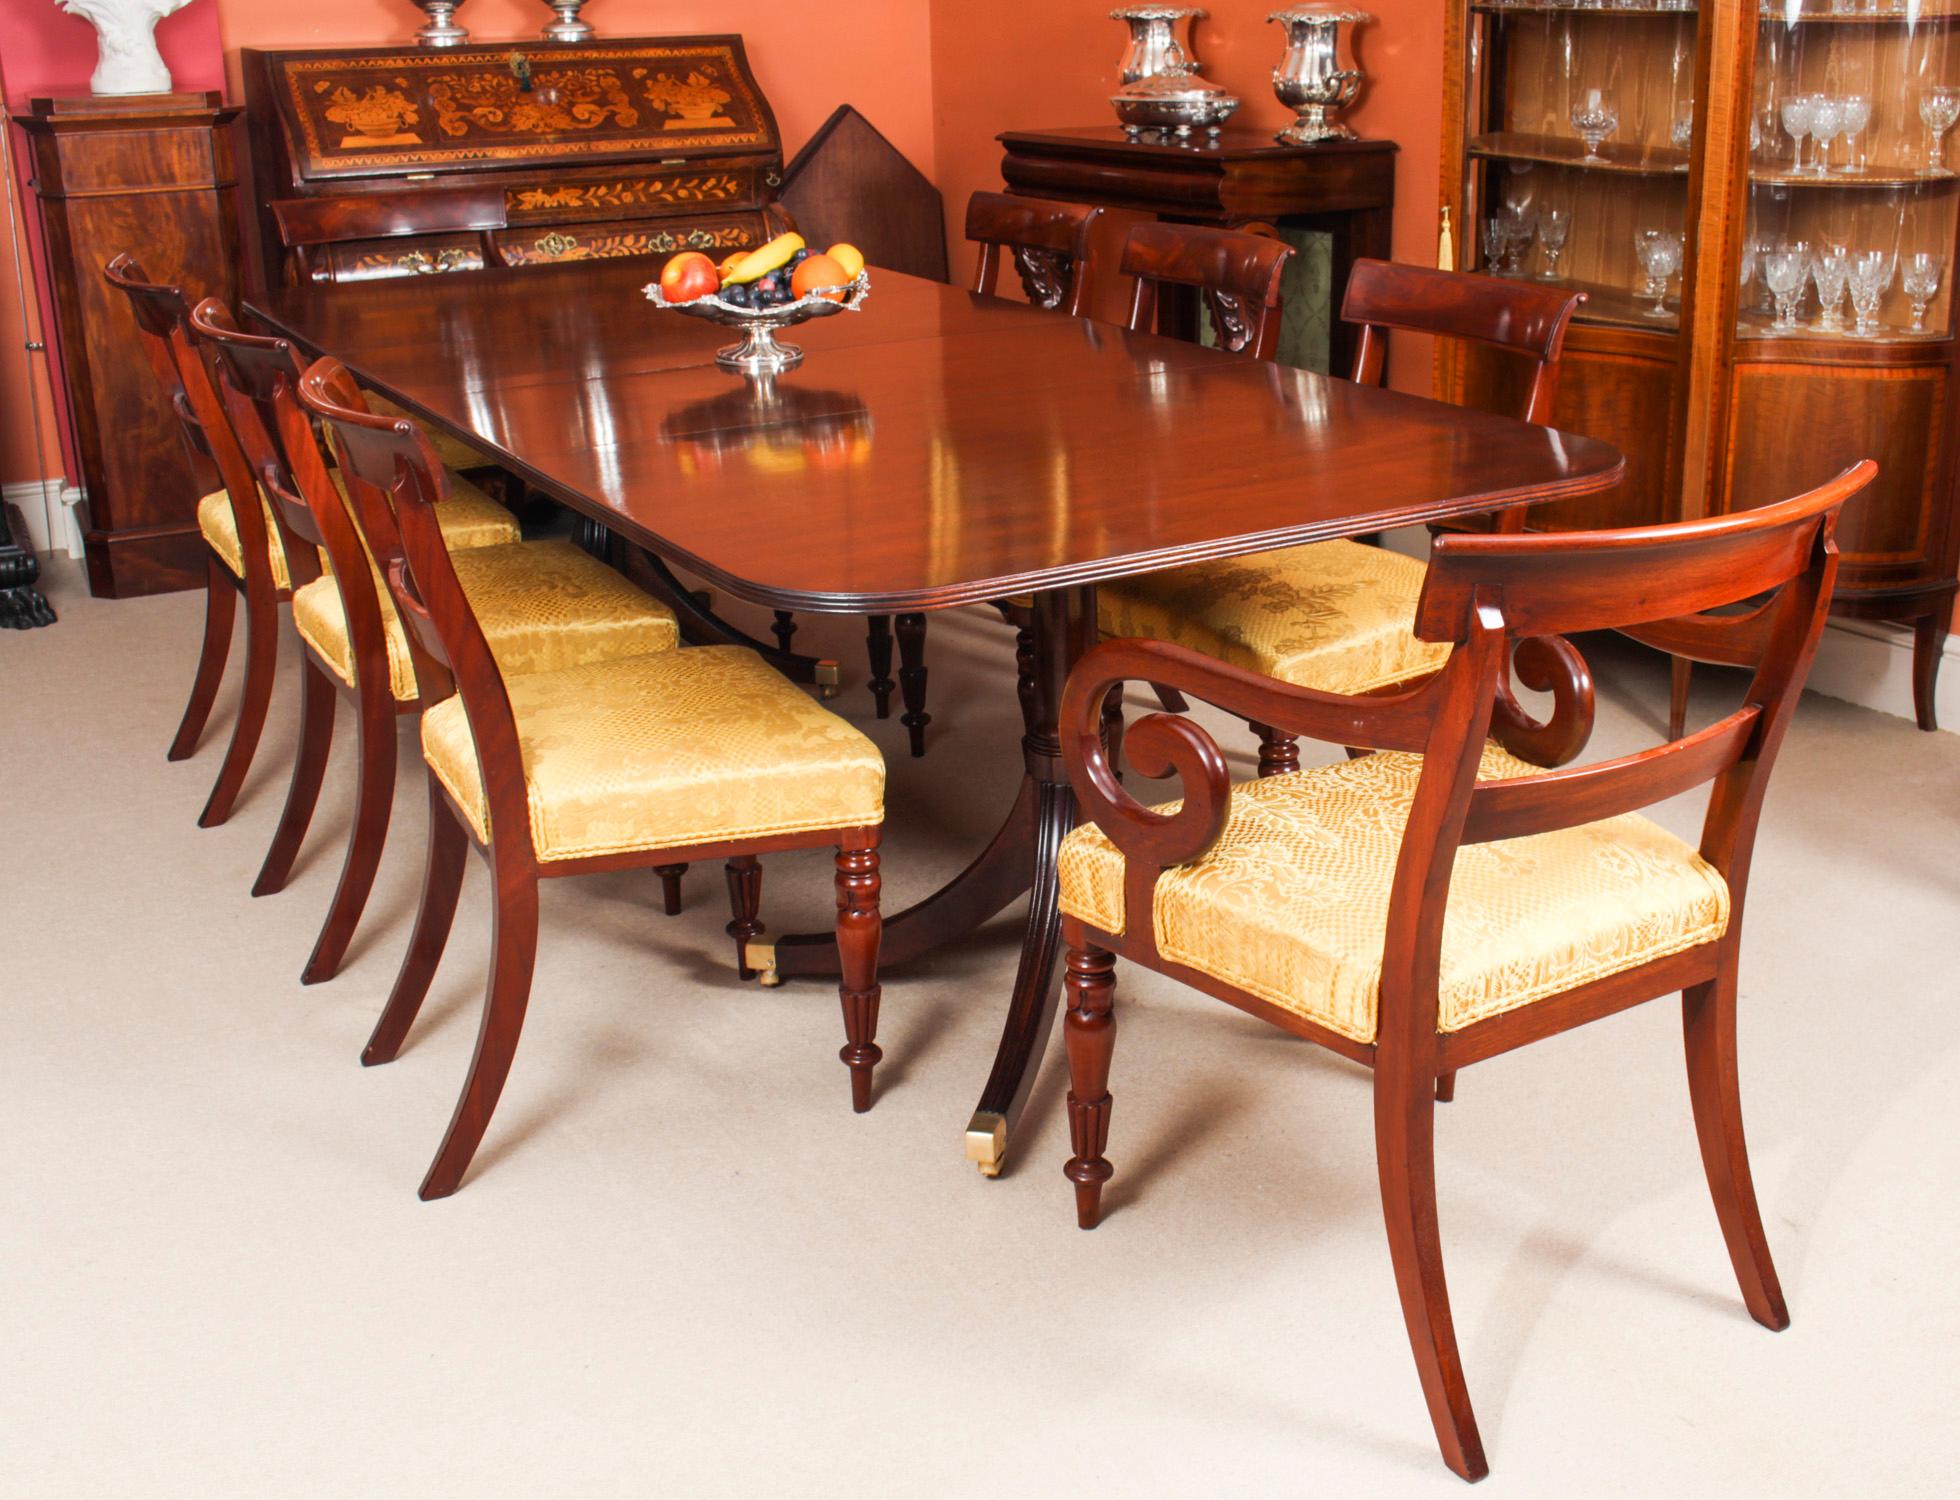 Regency Revival Vintage Twin Pillar Dining Table by William Tillman 20C & 8 Chairs 19th C